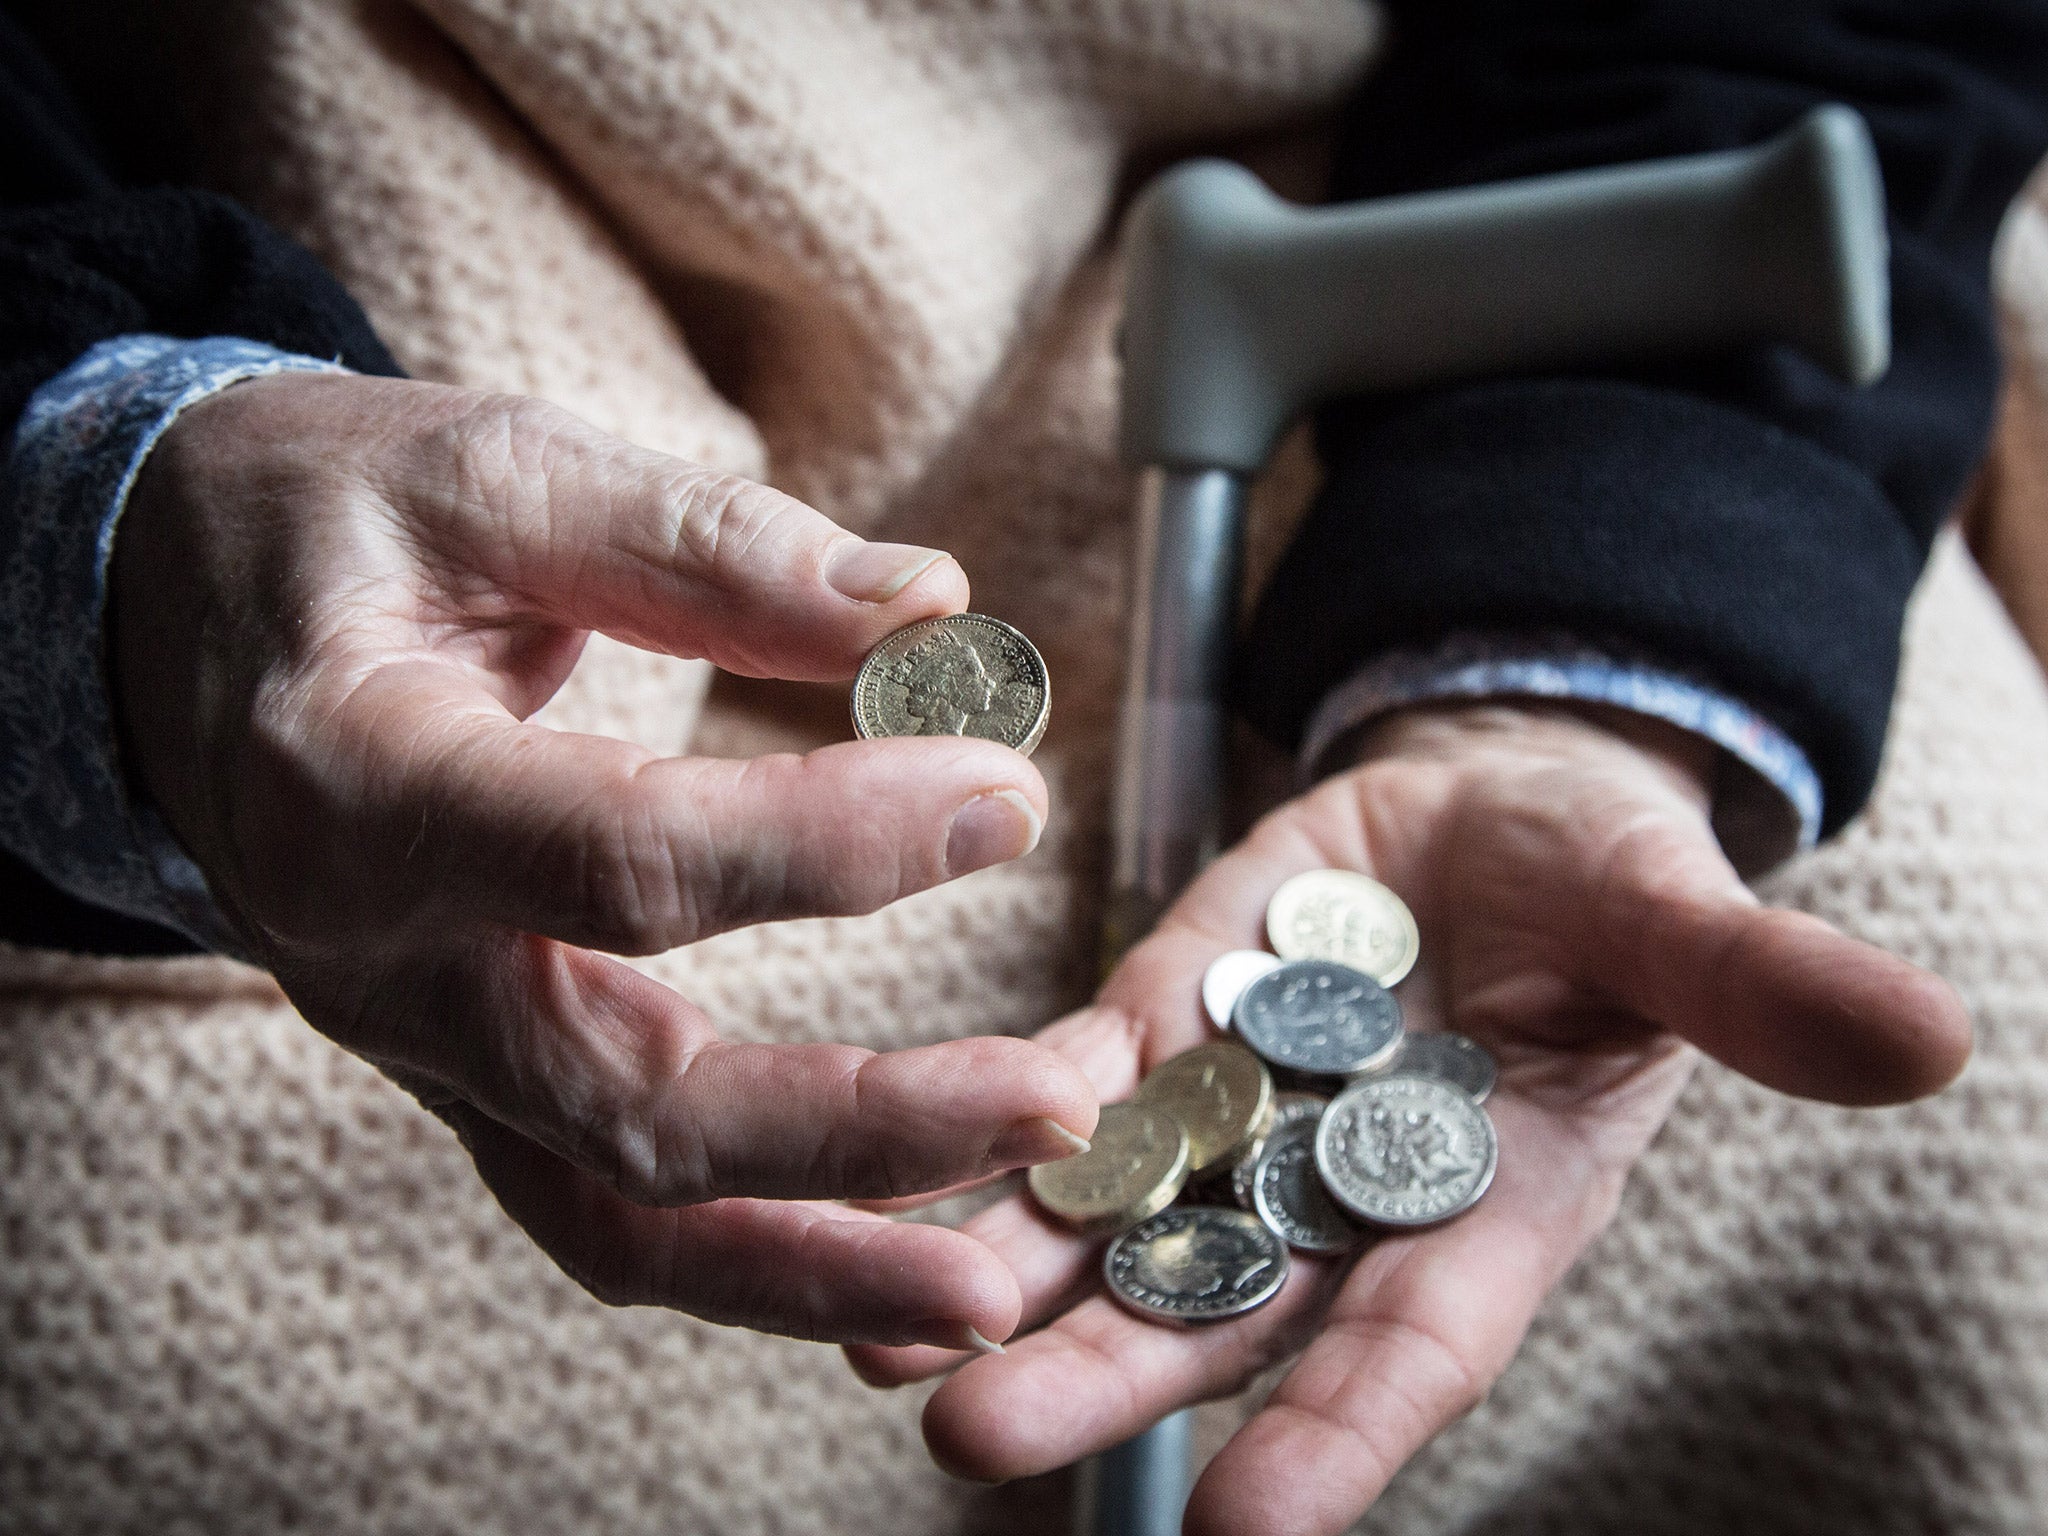 The ONS identified the uprating of the state pension by 3 per cent, in line with inflation, as one of the reasons for higher state spending in the month